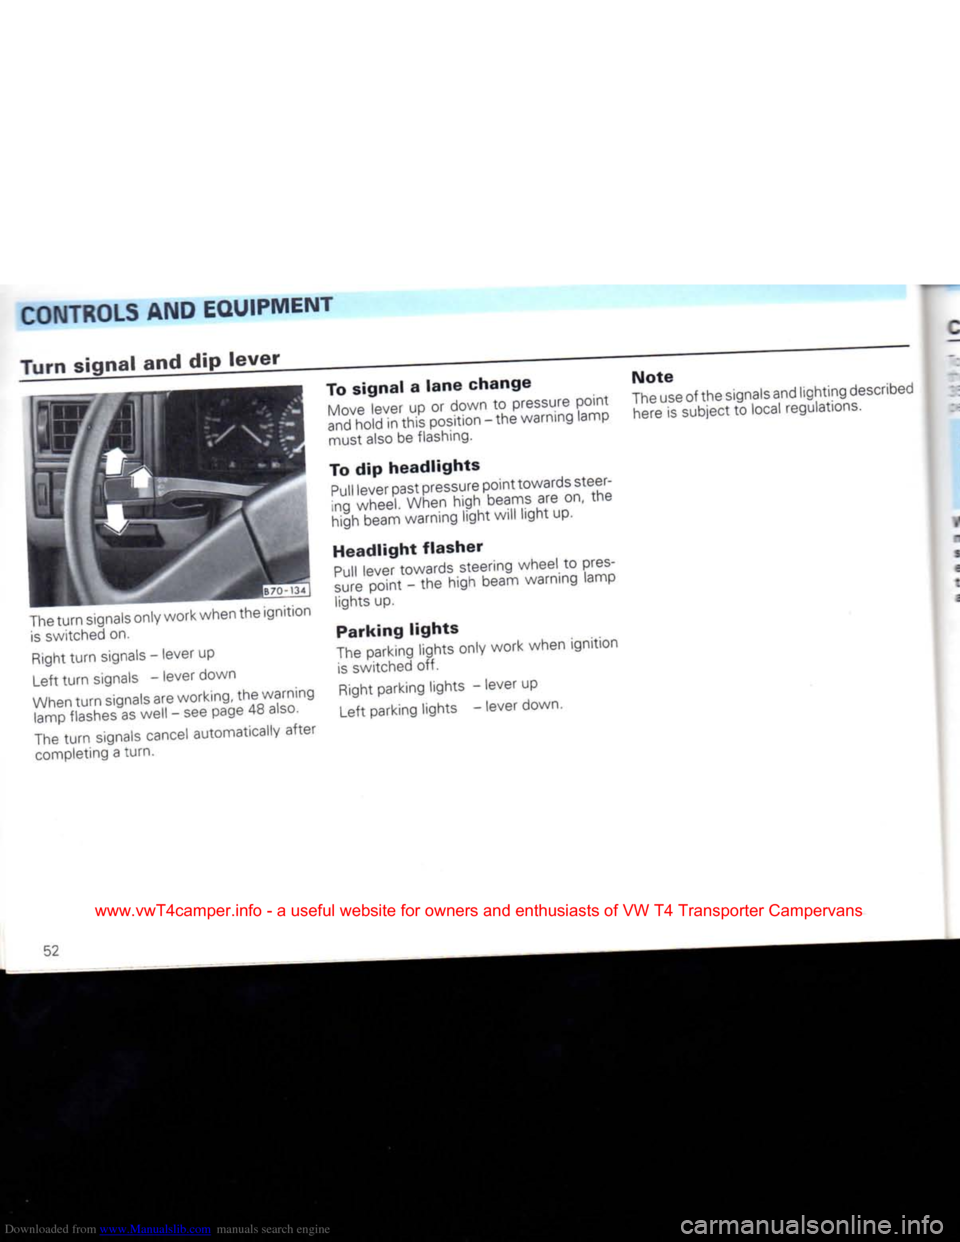 VOLKSWAGEN TRANSPORTER 1992 T4 / 4.G User Guide Downloaded from www.Manualslib.com manuals search engine 
CONTROLS
 AND EQUIPMENT 
Turn signal and dip
 lever 

The
 turn
 signals only work when the ignition 
 is
 switched on. 

Right
 turn
 signals